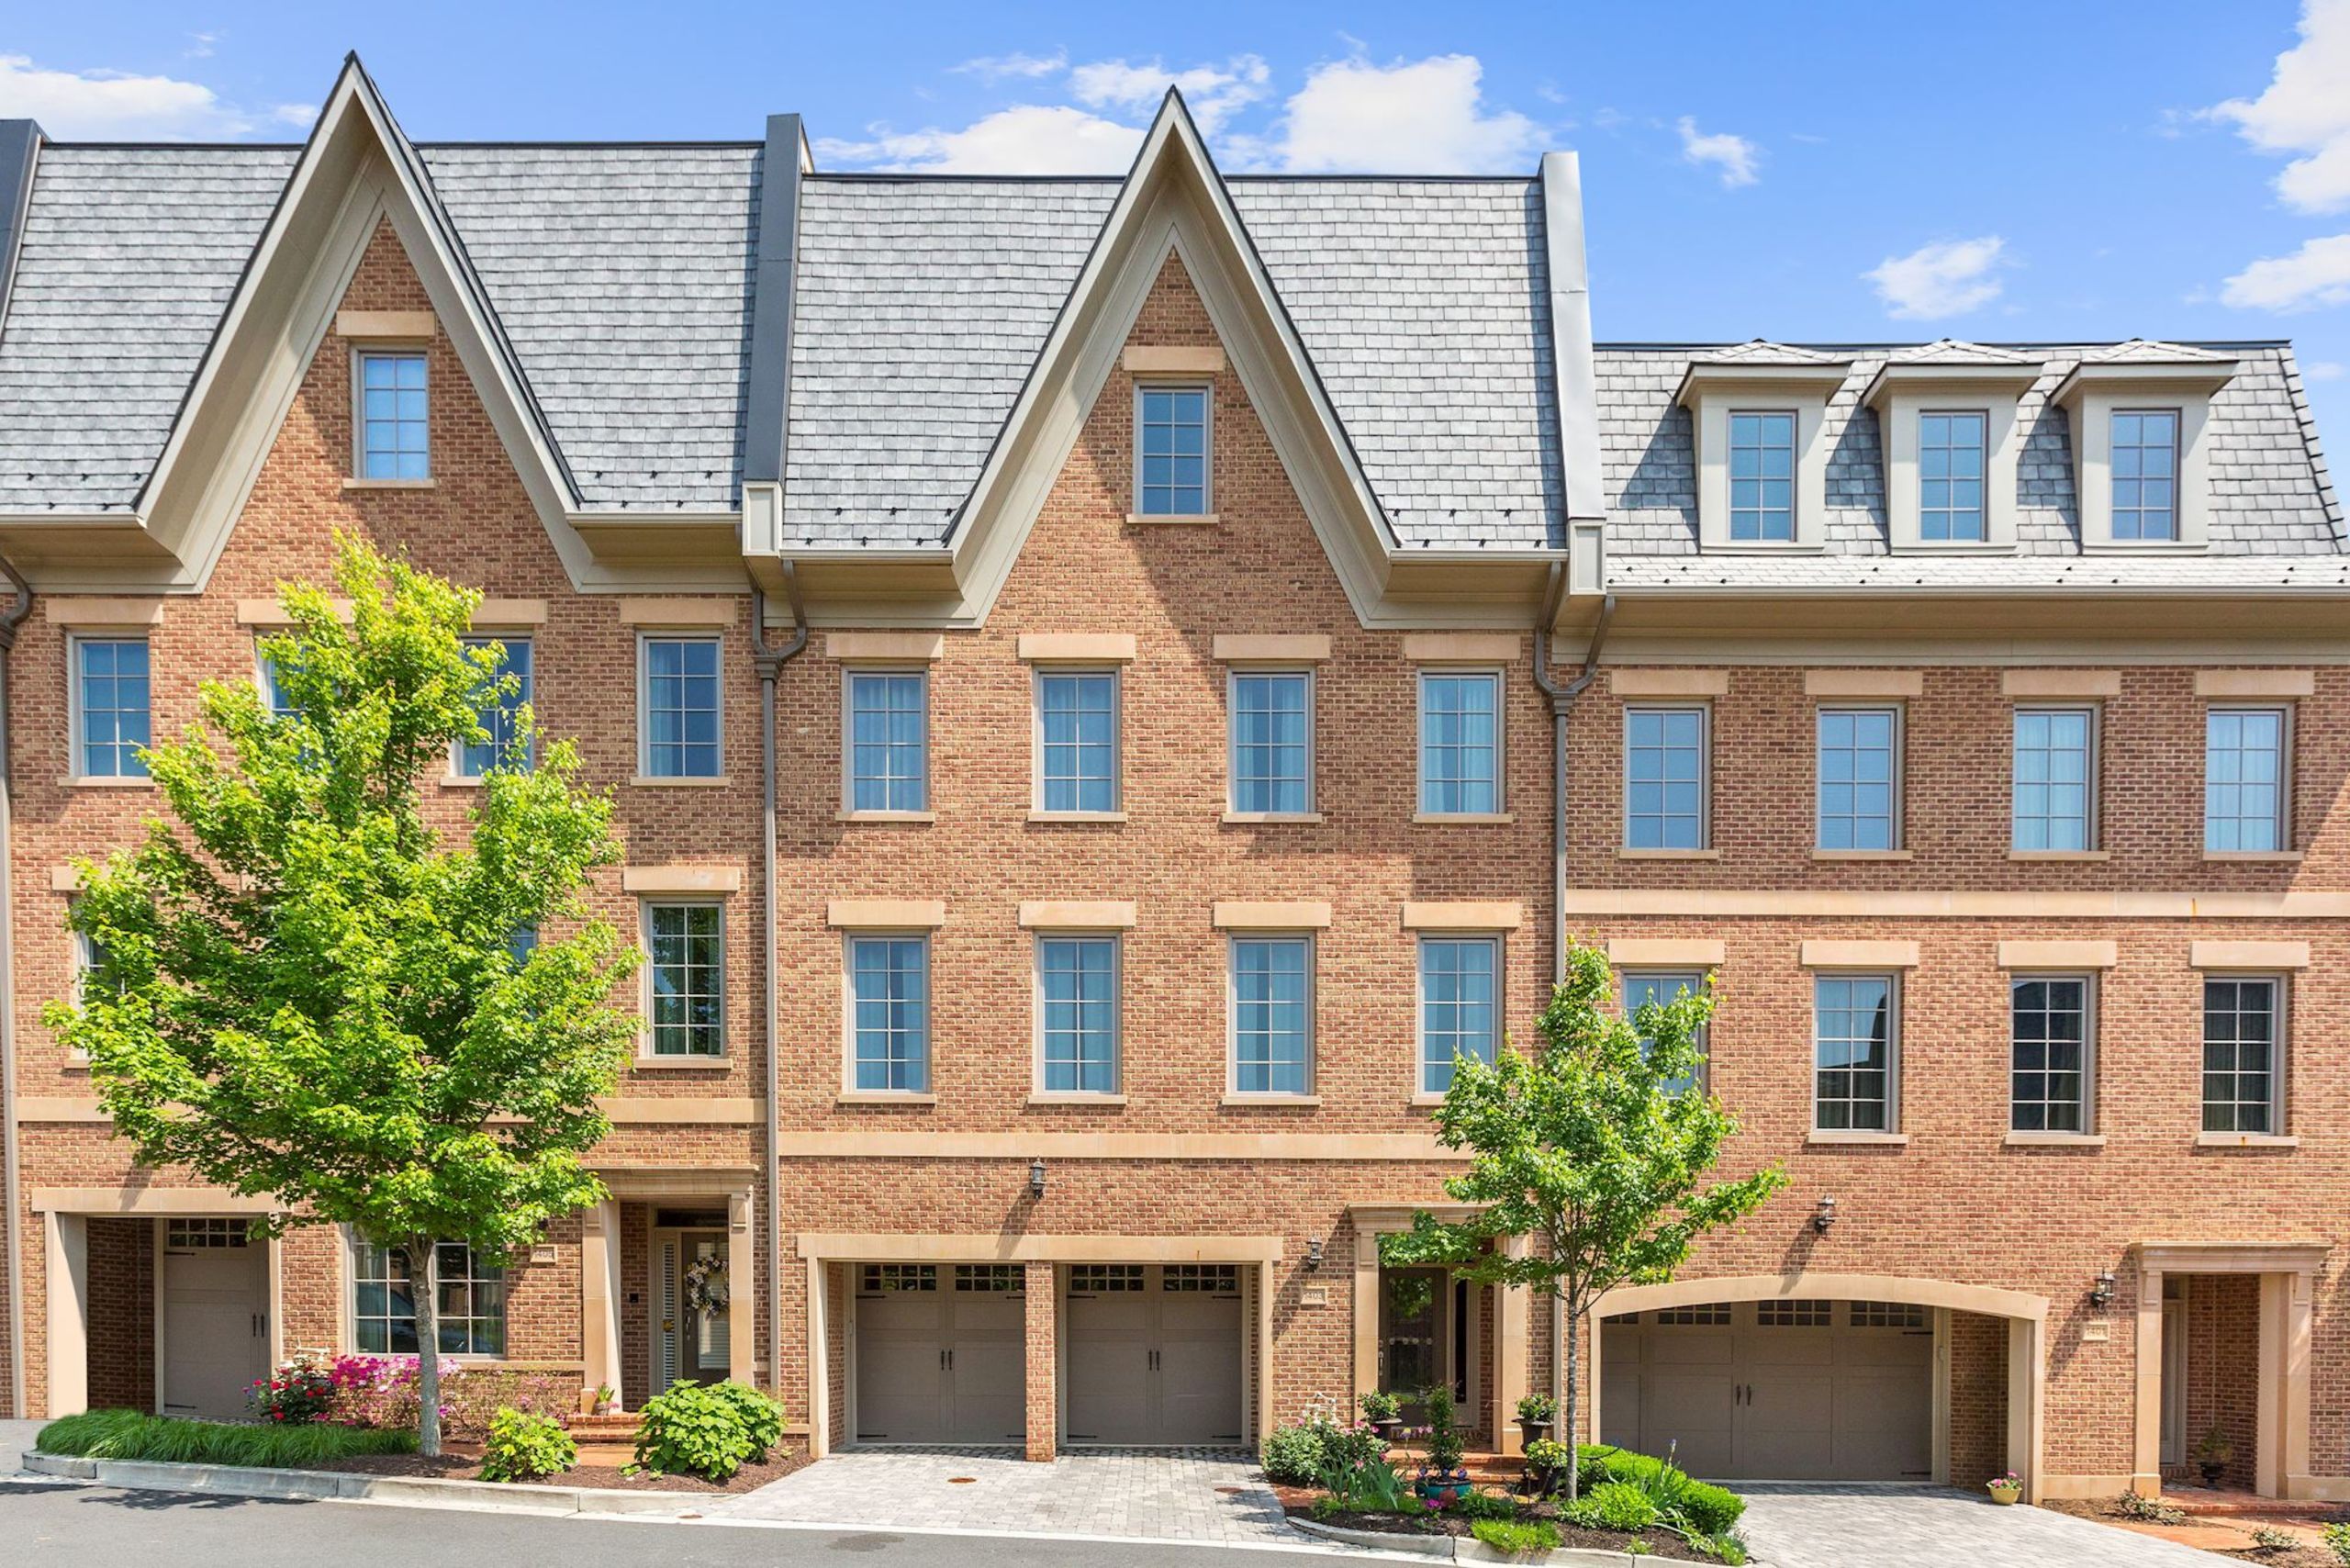 SOLD - Foxhall, DC - $1,775,000 - Represented Seller